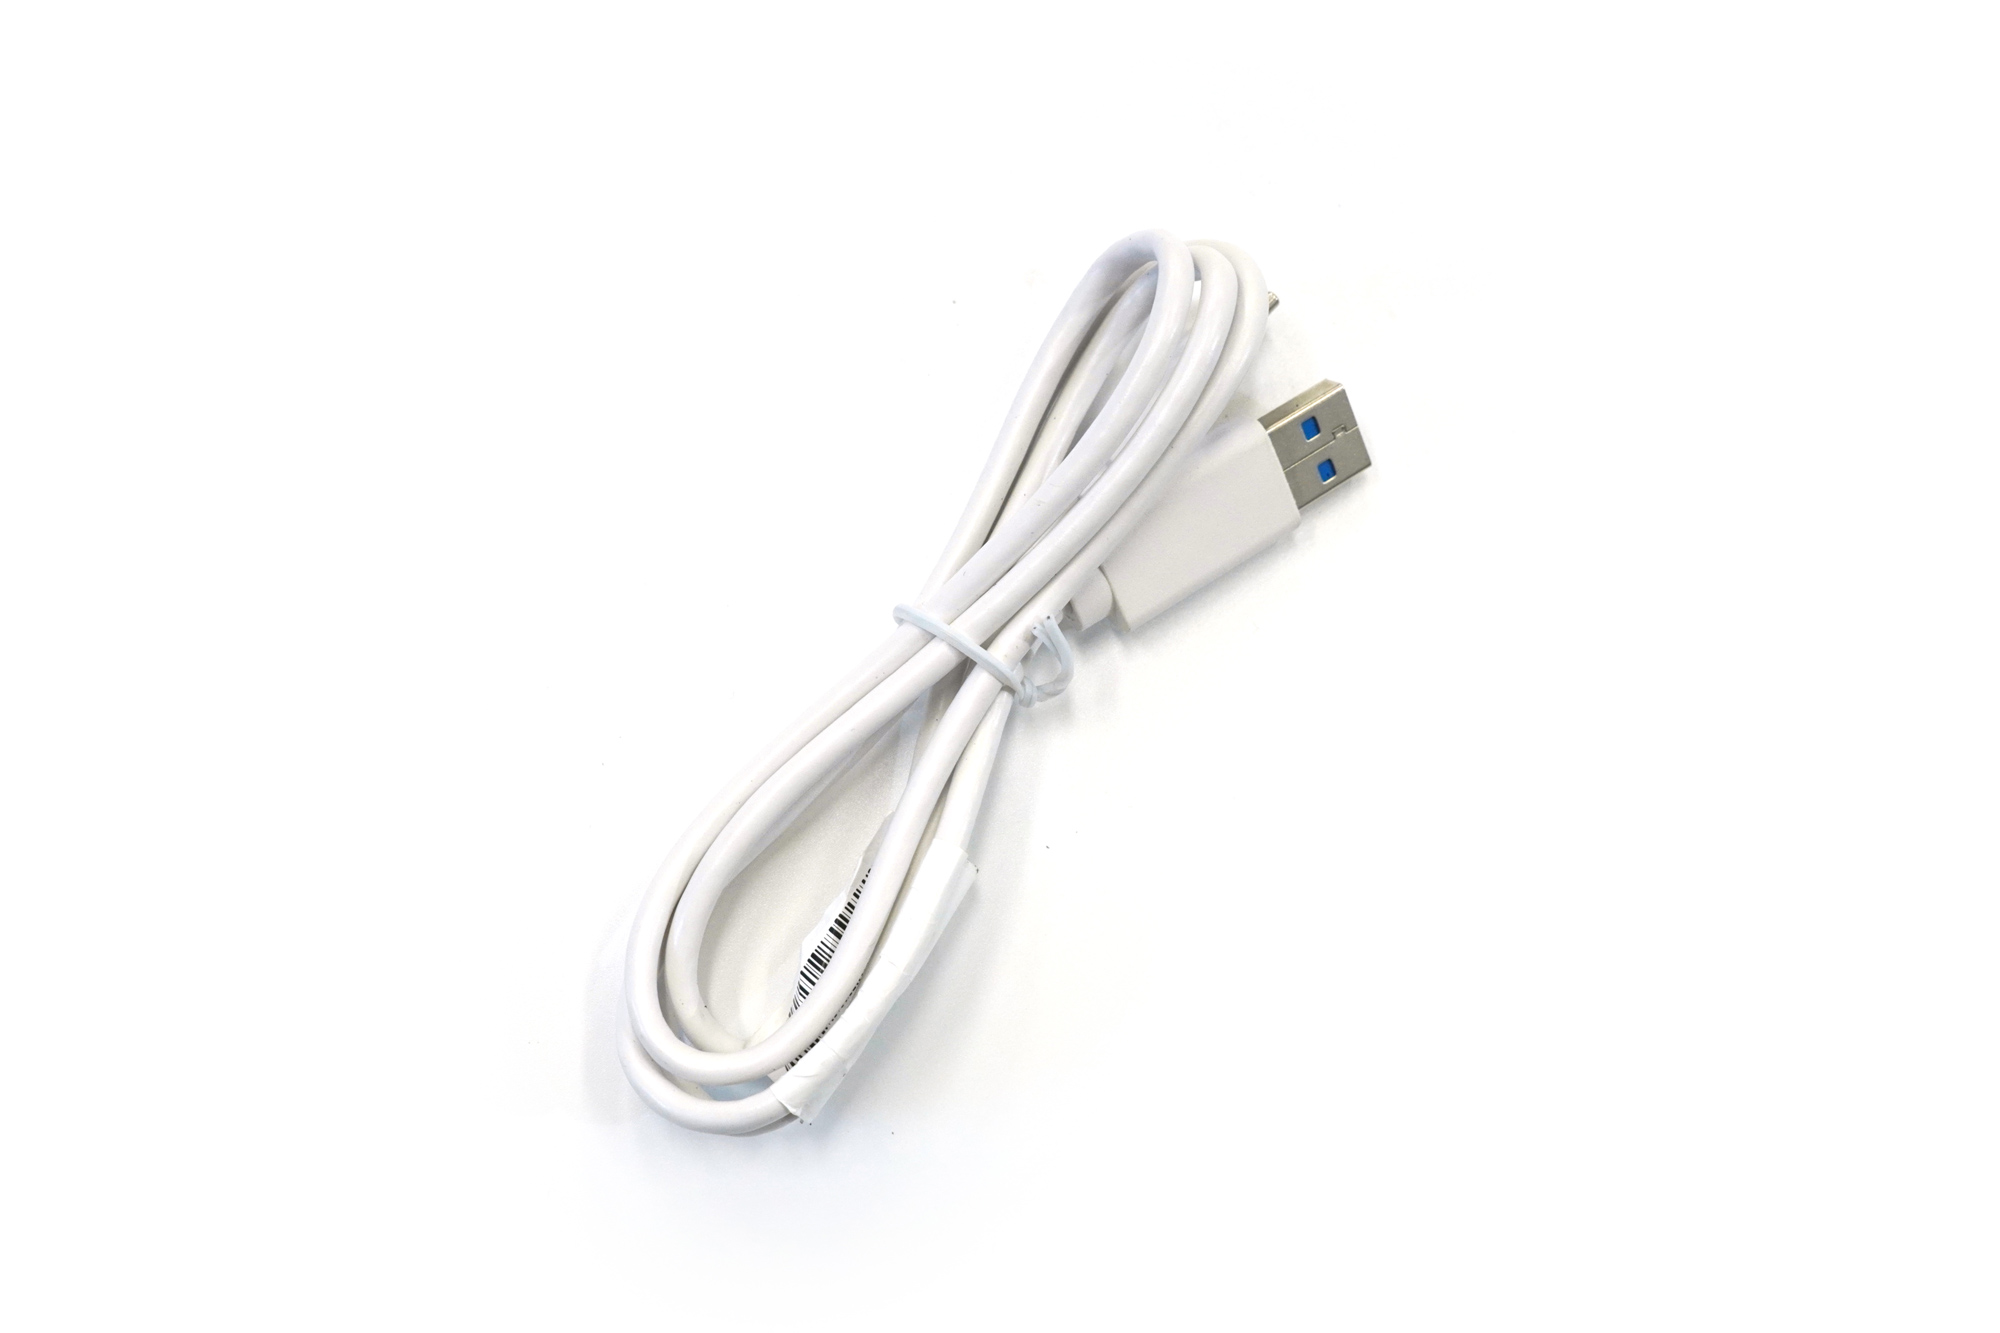 21-USB-A-to-USB-C-Cable.jpg